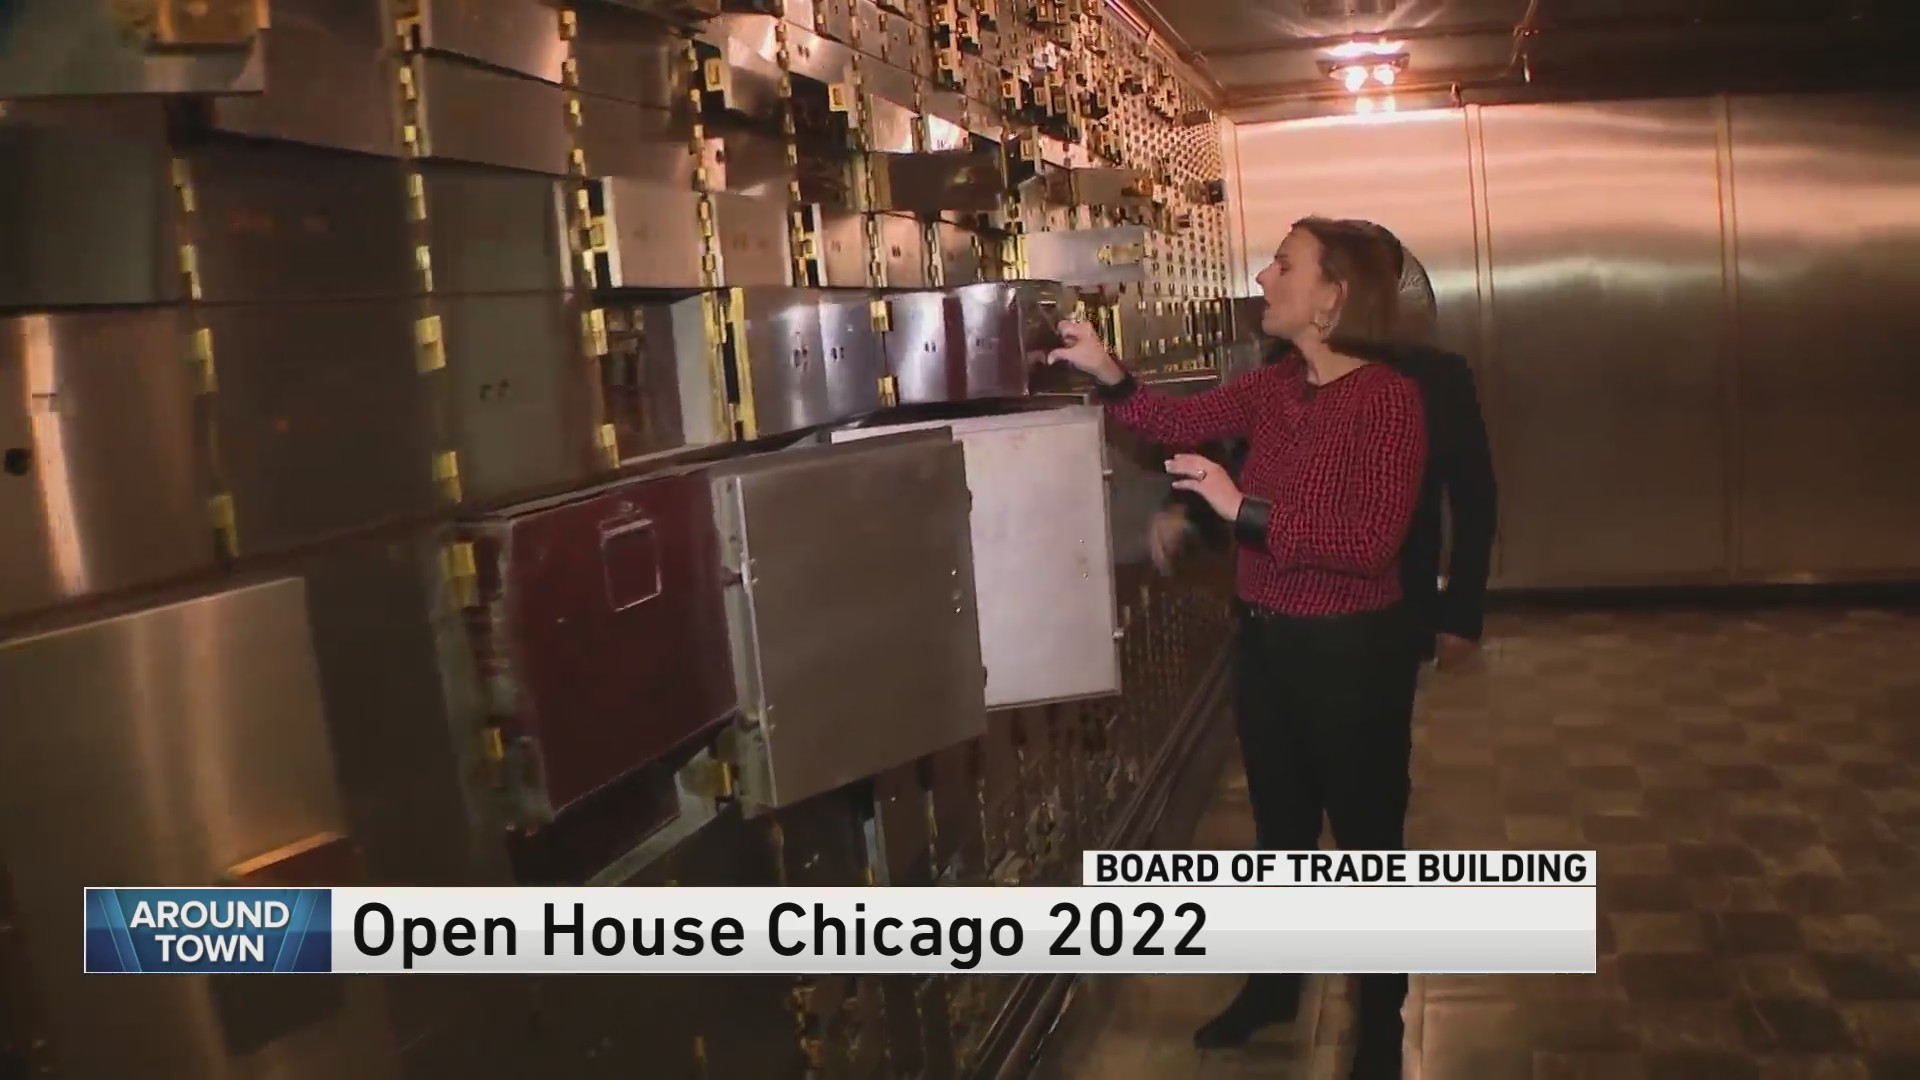 Around Town checks out Open House Chicago 2022